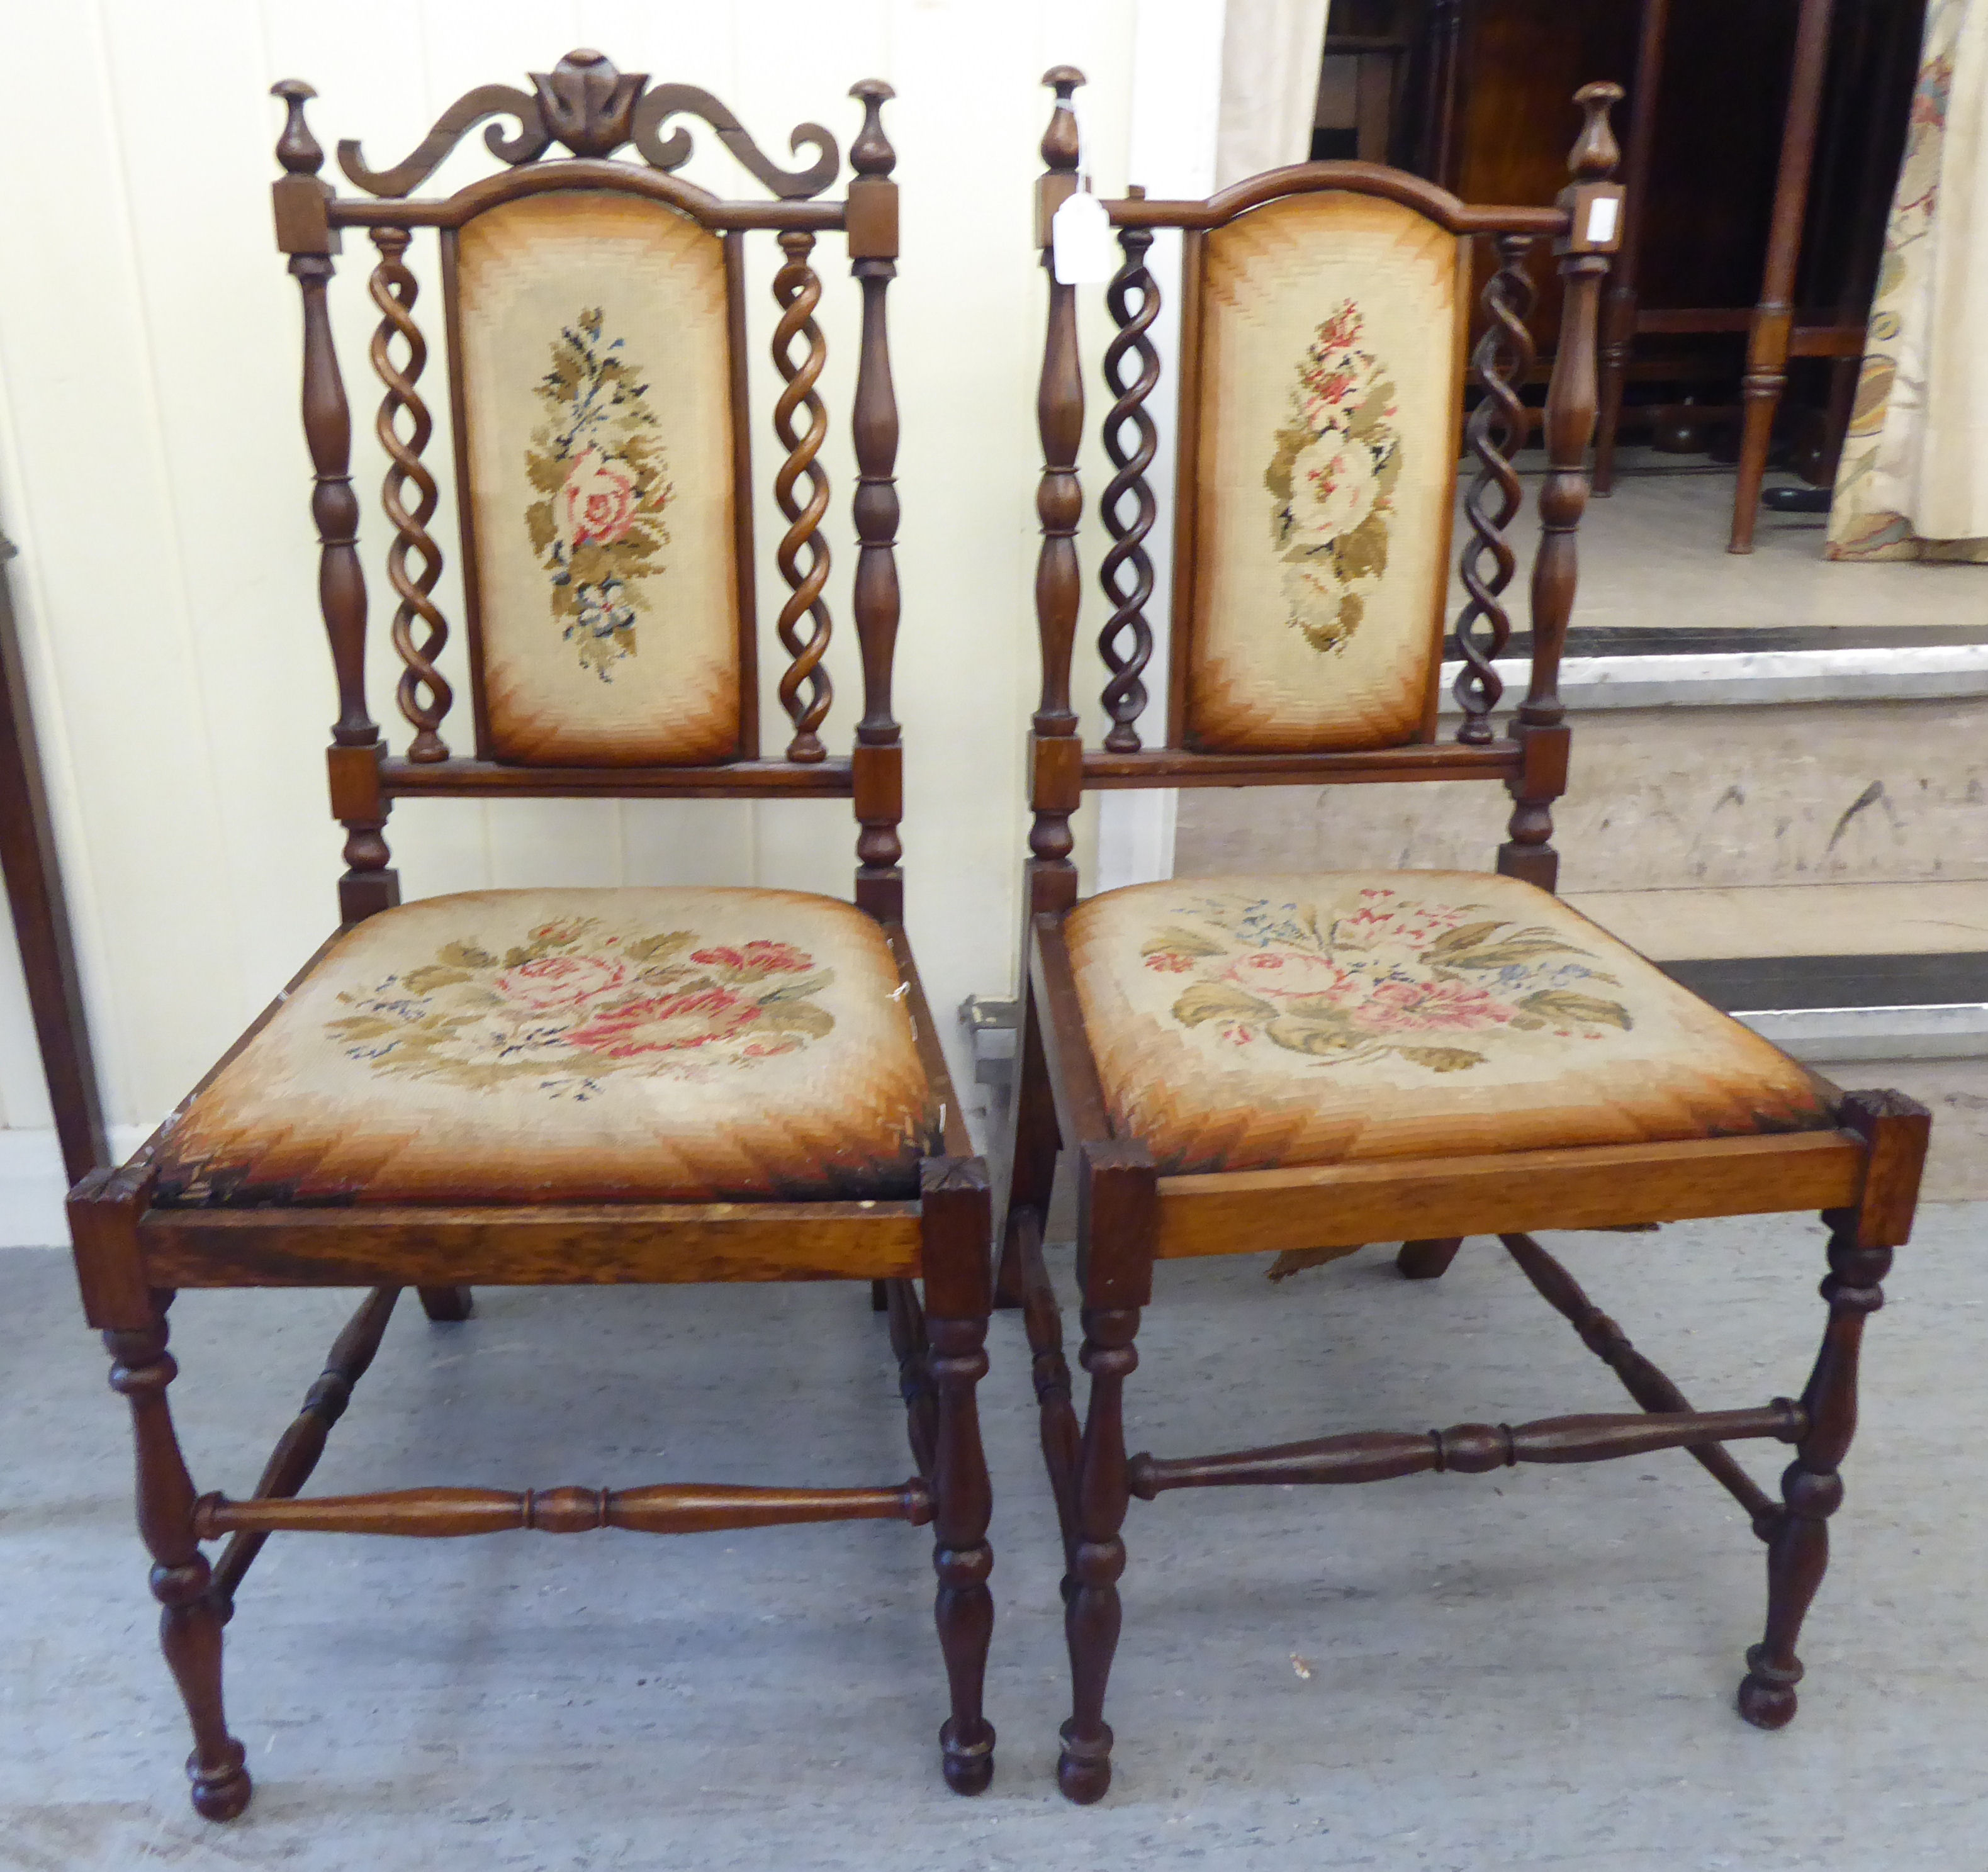 A pair of 19thC rosewood framed drawing room chairs of diminutive proportions, each with an